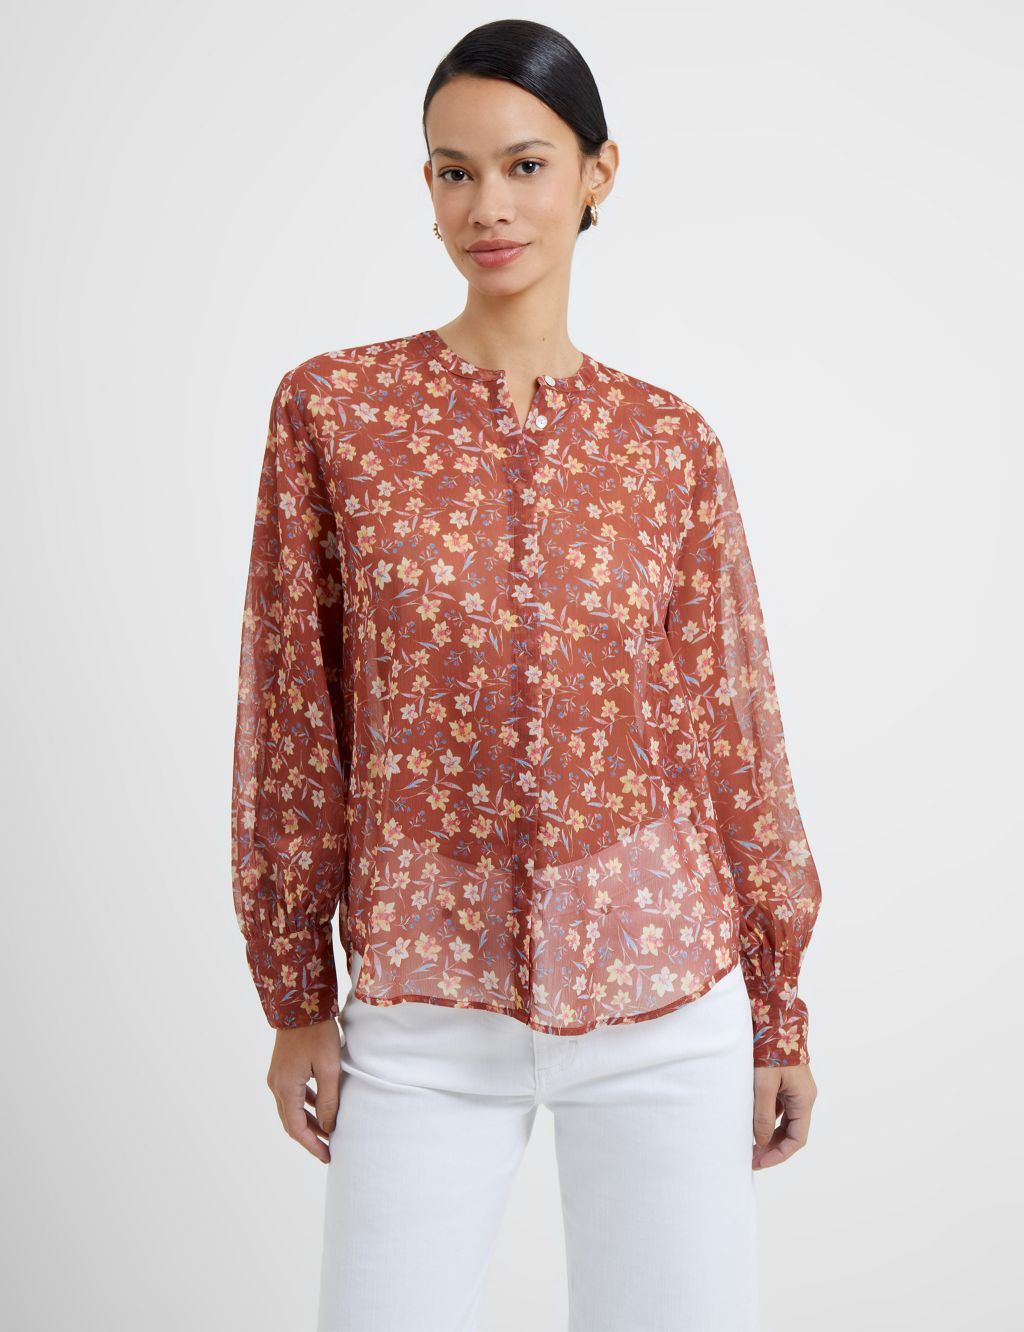 Sheer Floral Relaxed Shirt image 1